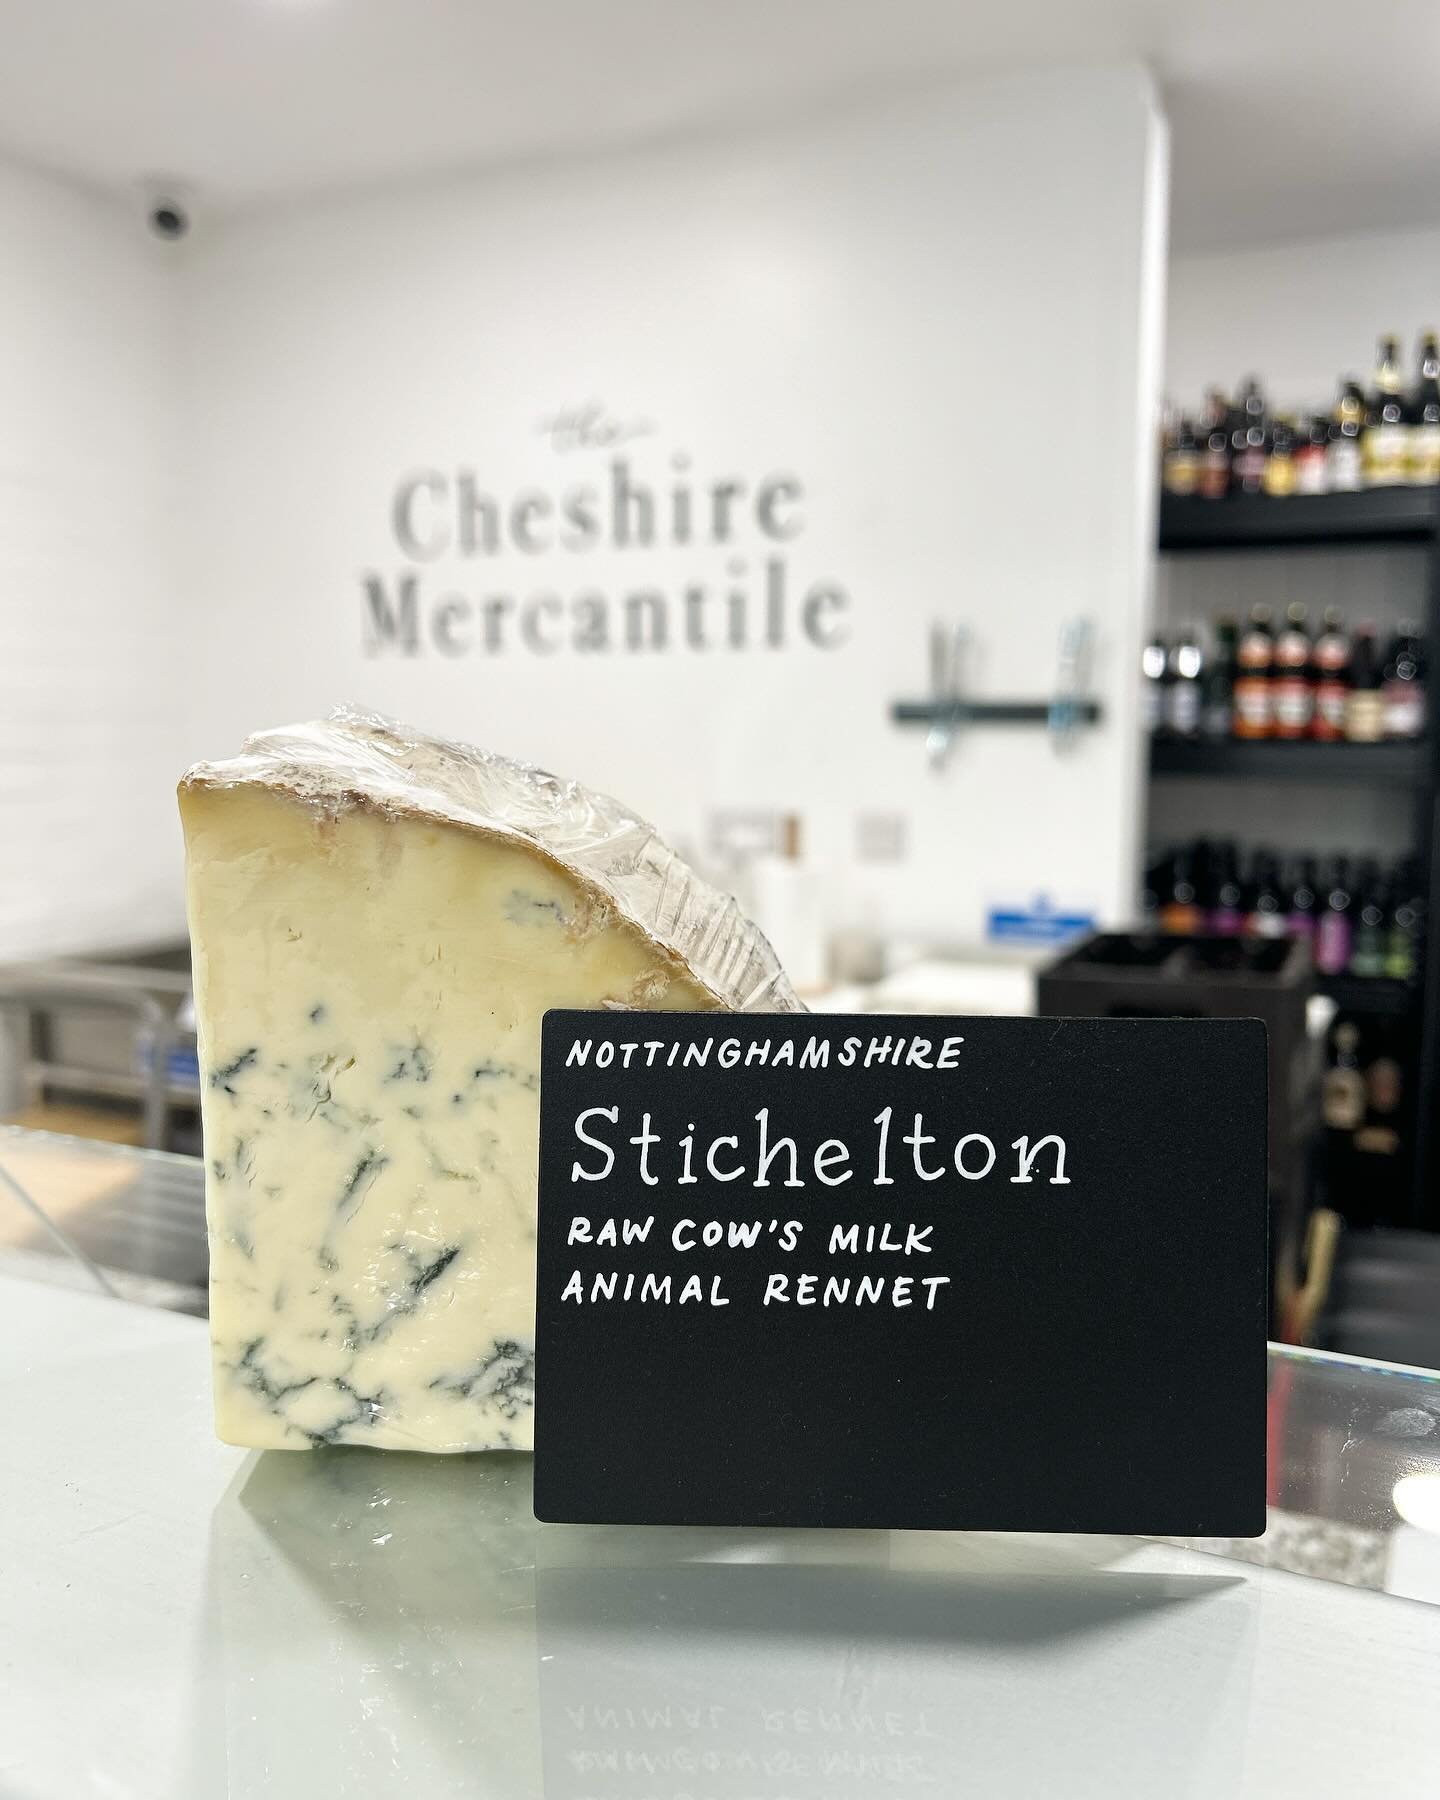 We&rsquo;ve really got all the goods for this bank holiday weekend. Swipe through to see our newest cheese arrivals and the freshest bread from @bradwallbakehouse (available Fridays and Saturdays)